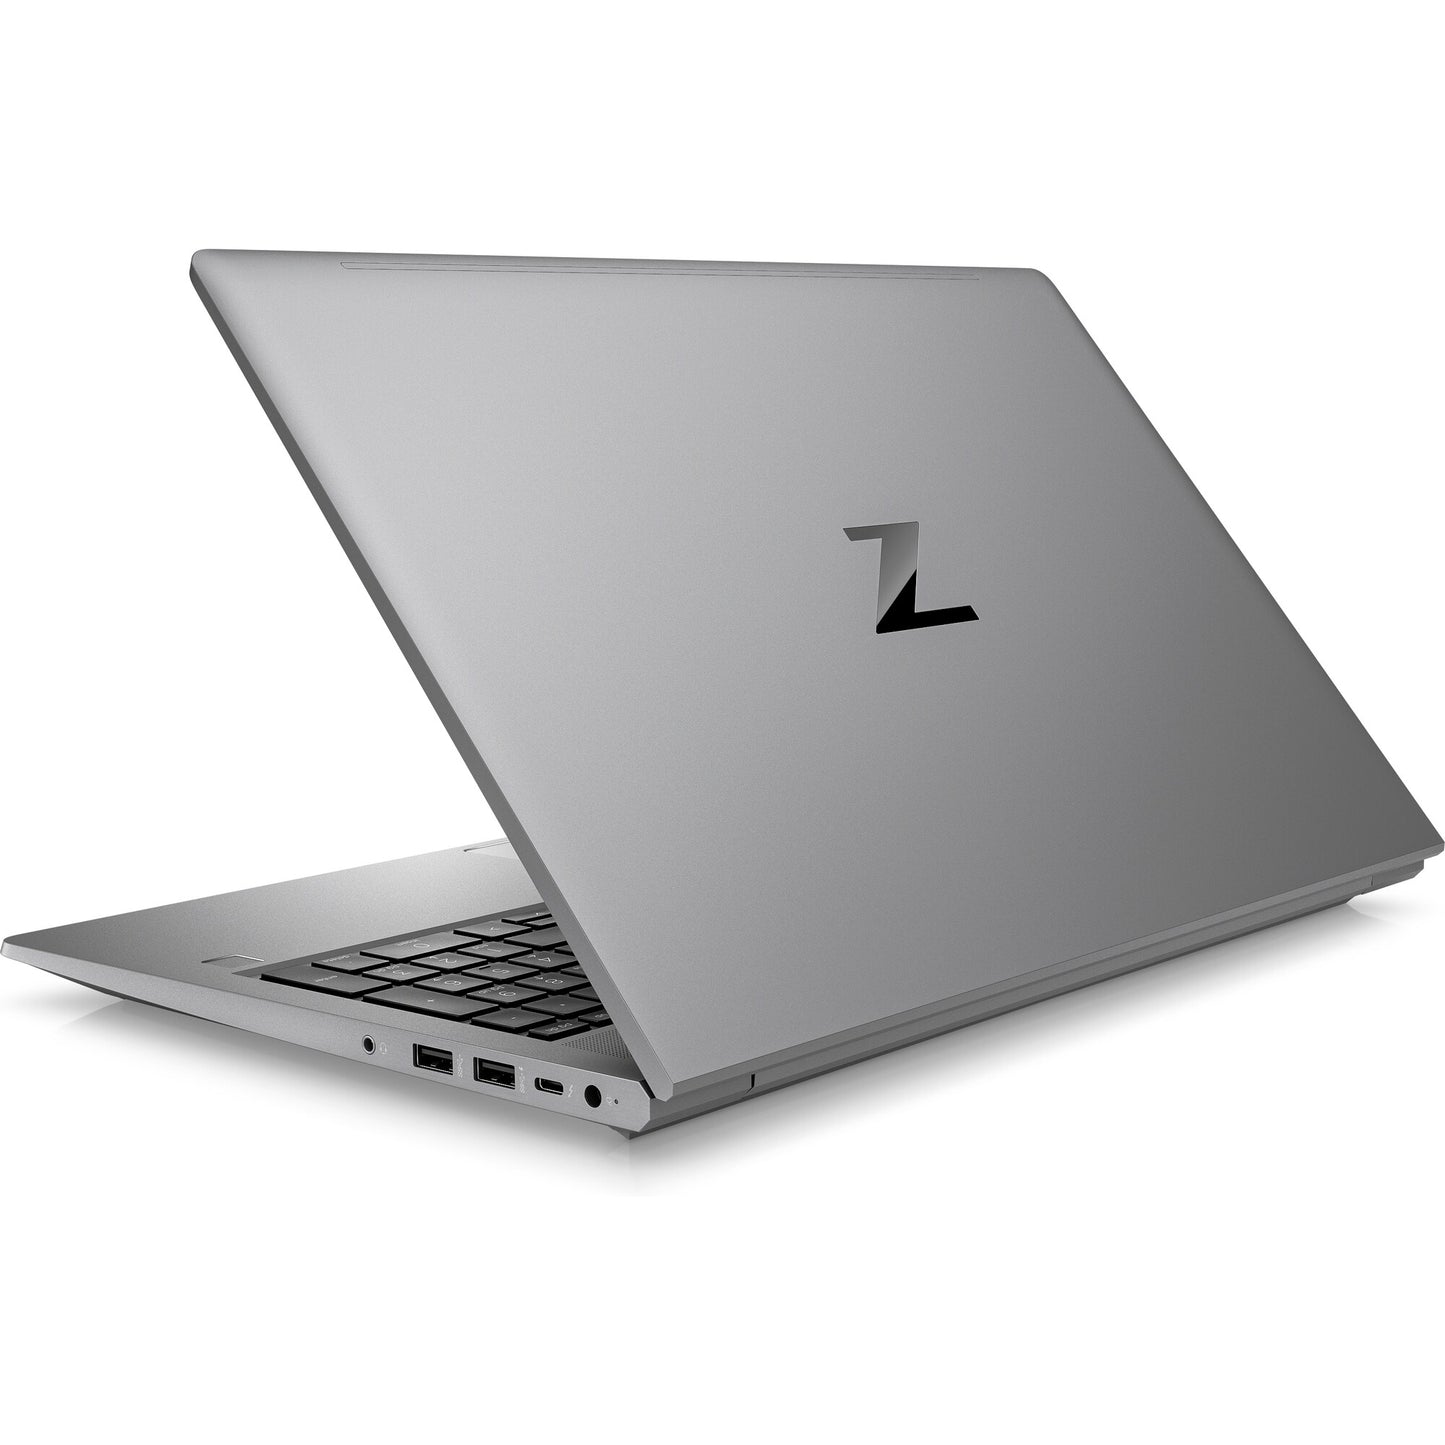 HP ZBook Power 15.6 inch G9 Mobile Workstation PC